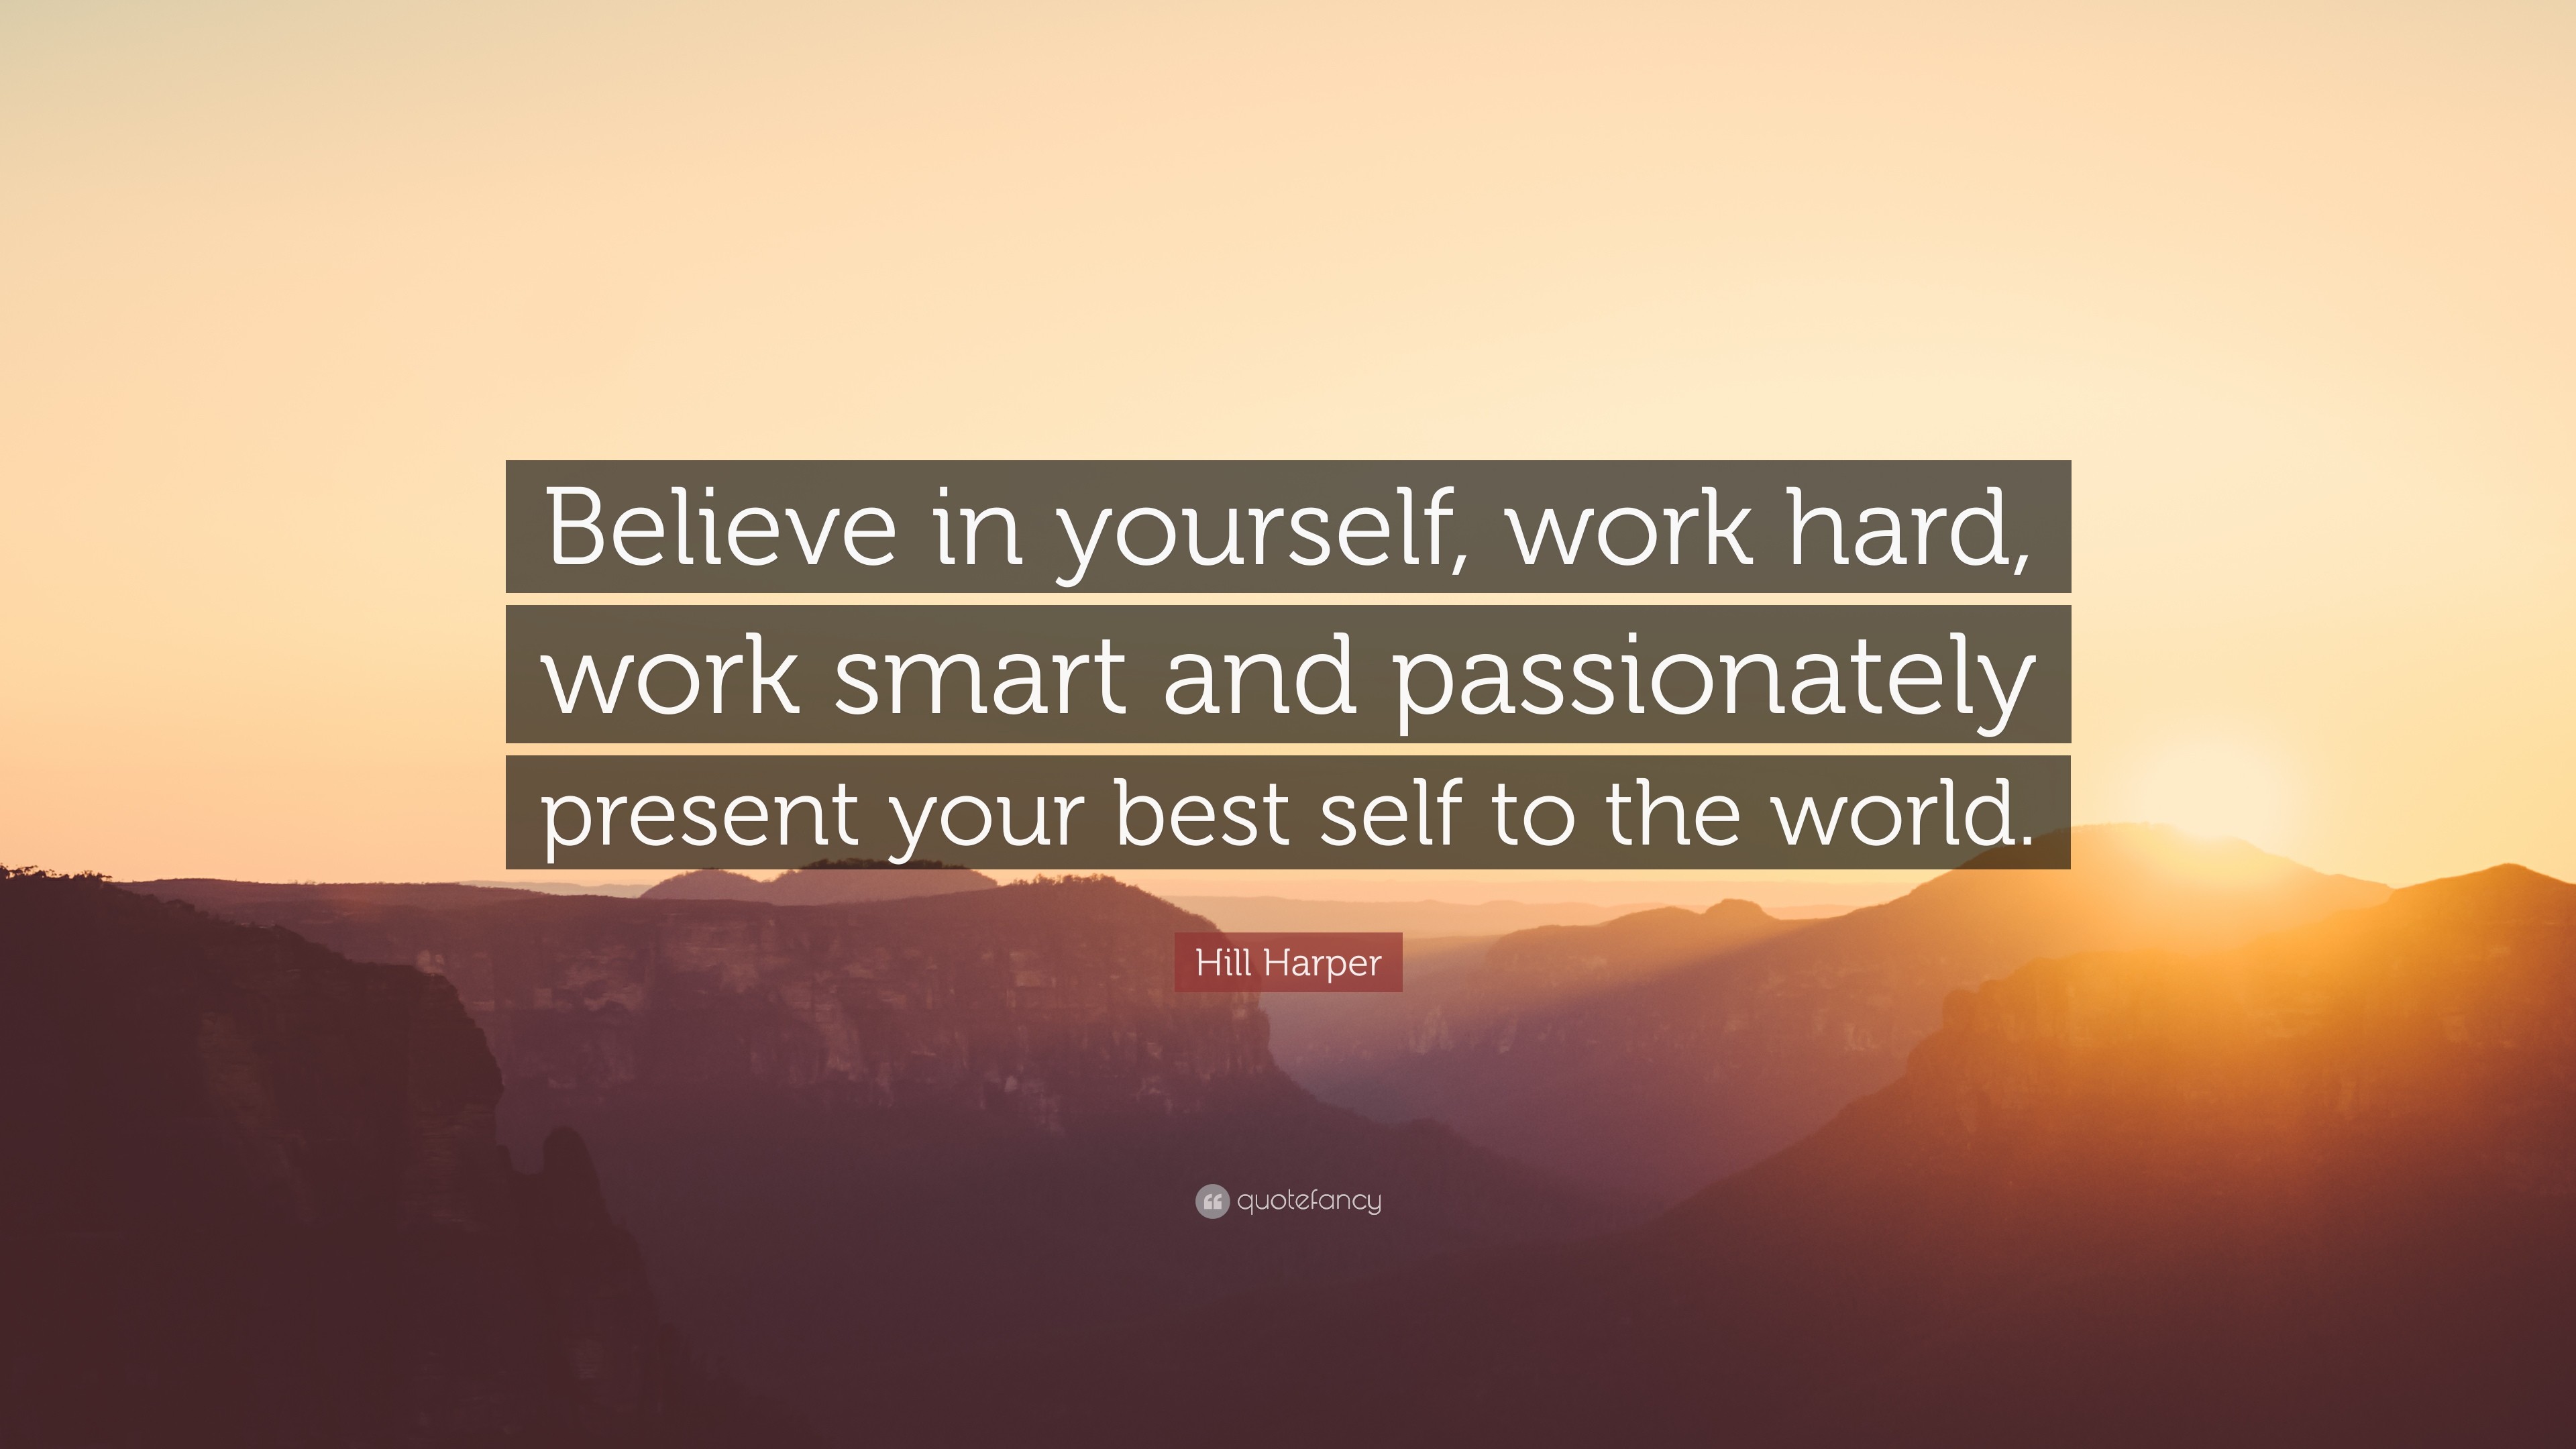 3840x2160 Hard Work Quotes: “Believe in yourself, work hard, work smart and  passionately